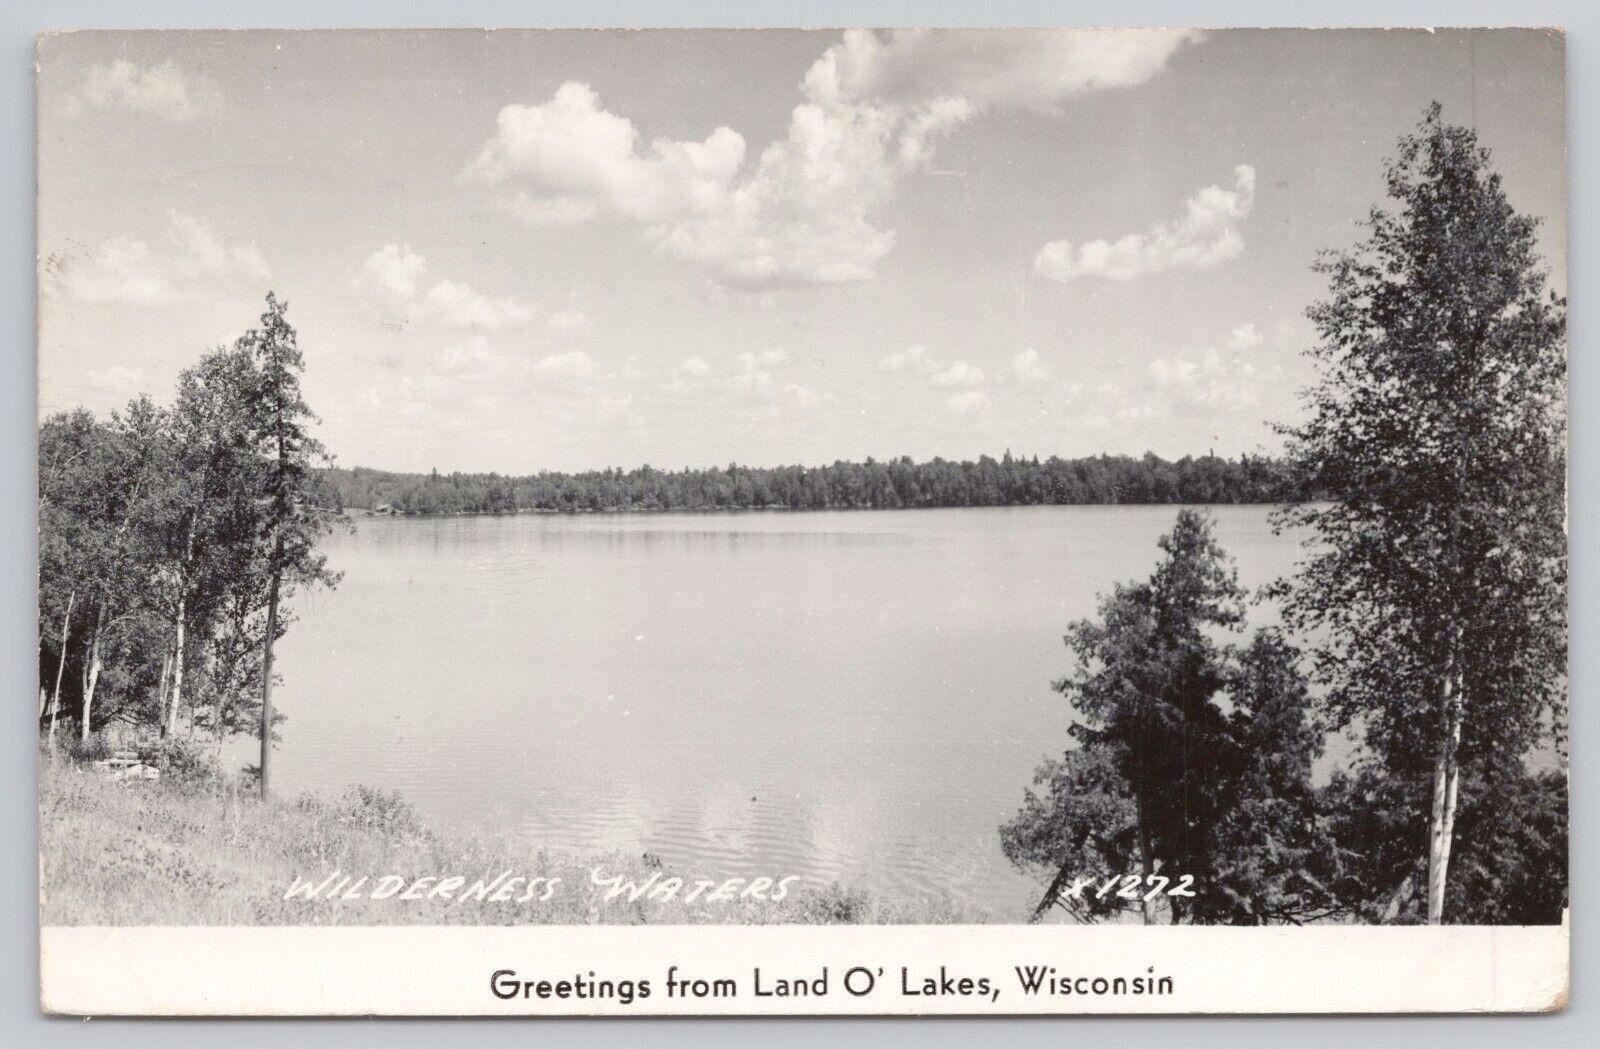 Land O' Lakes Wisconsin Greetings Wilderness Waters VTG RPPC Real Photo Postcard